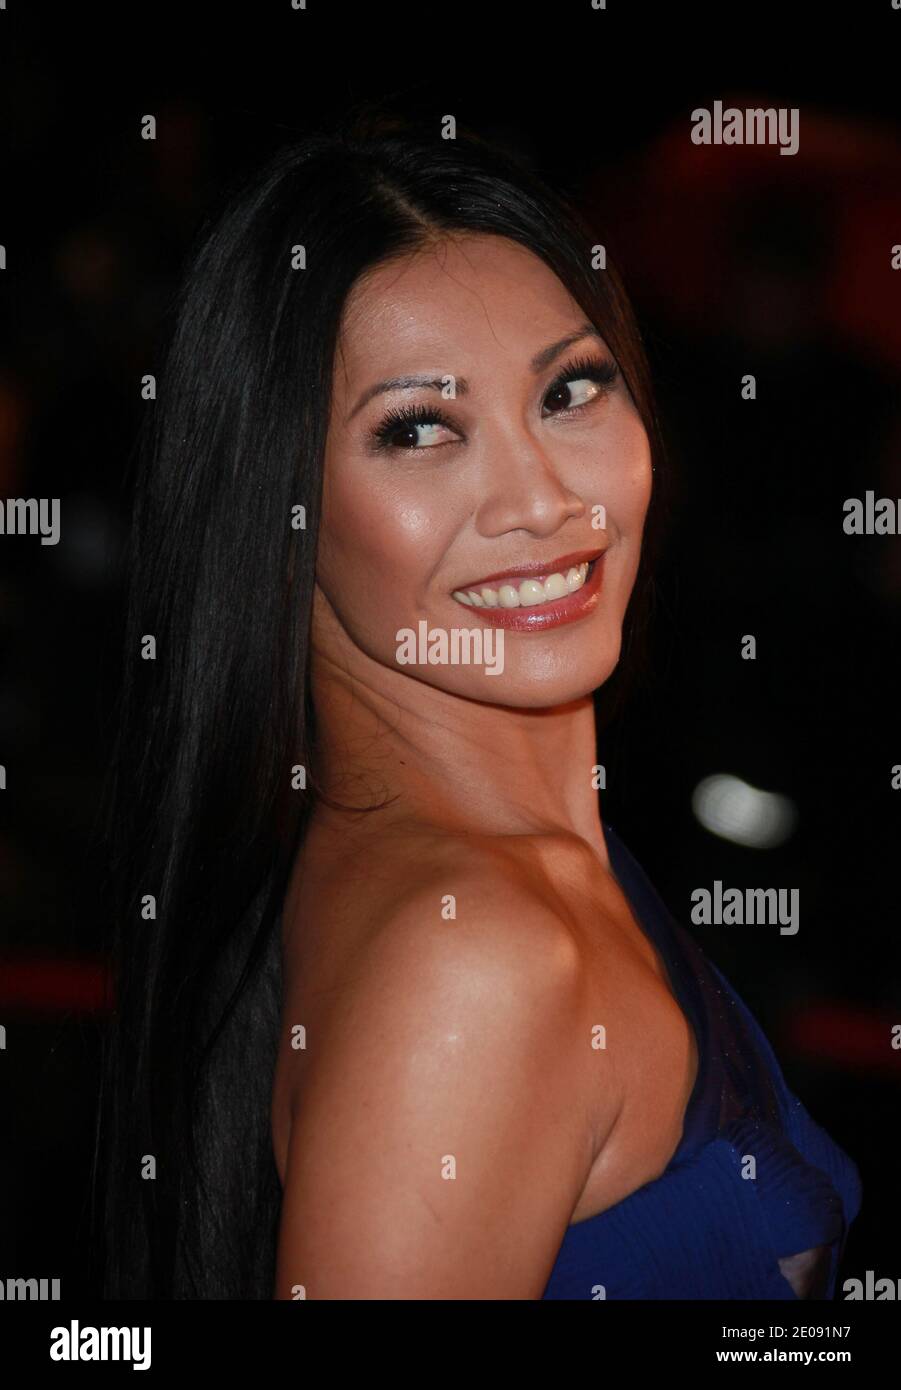 Anggun arriving to the 13th NRJ Music Awards ceremony held at the Palais Des Festivals in Cannes, France on January 28, 2012. Photo by Gorassini-Guignebourg/ABACAPRESS.COM Stock Photo